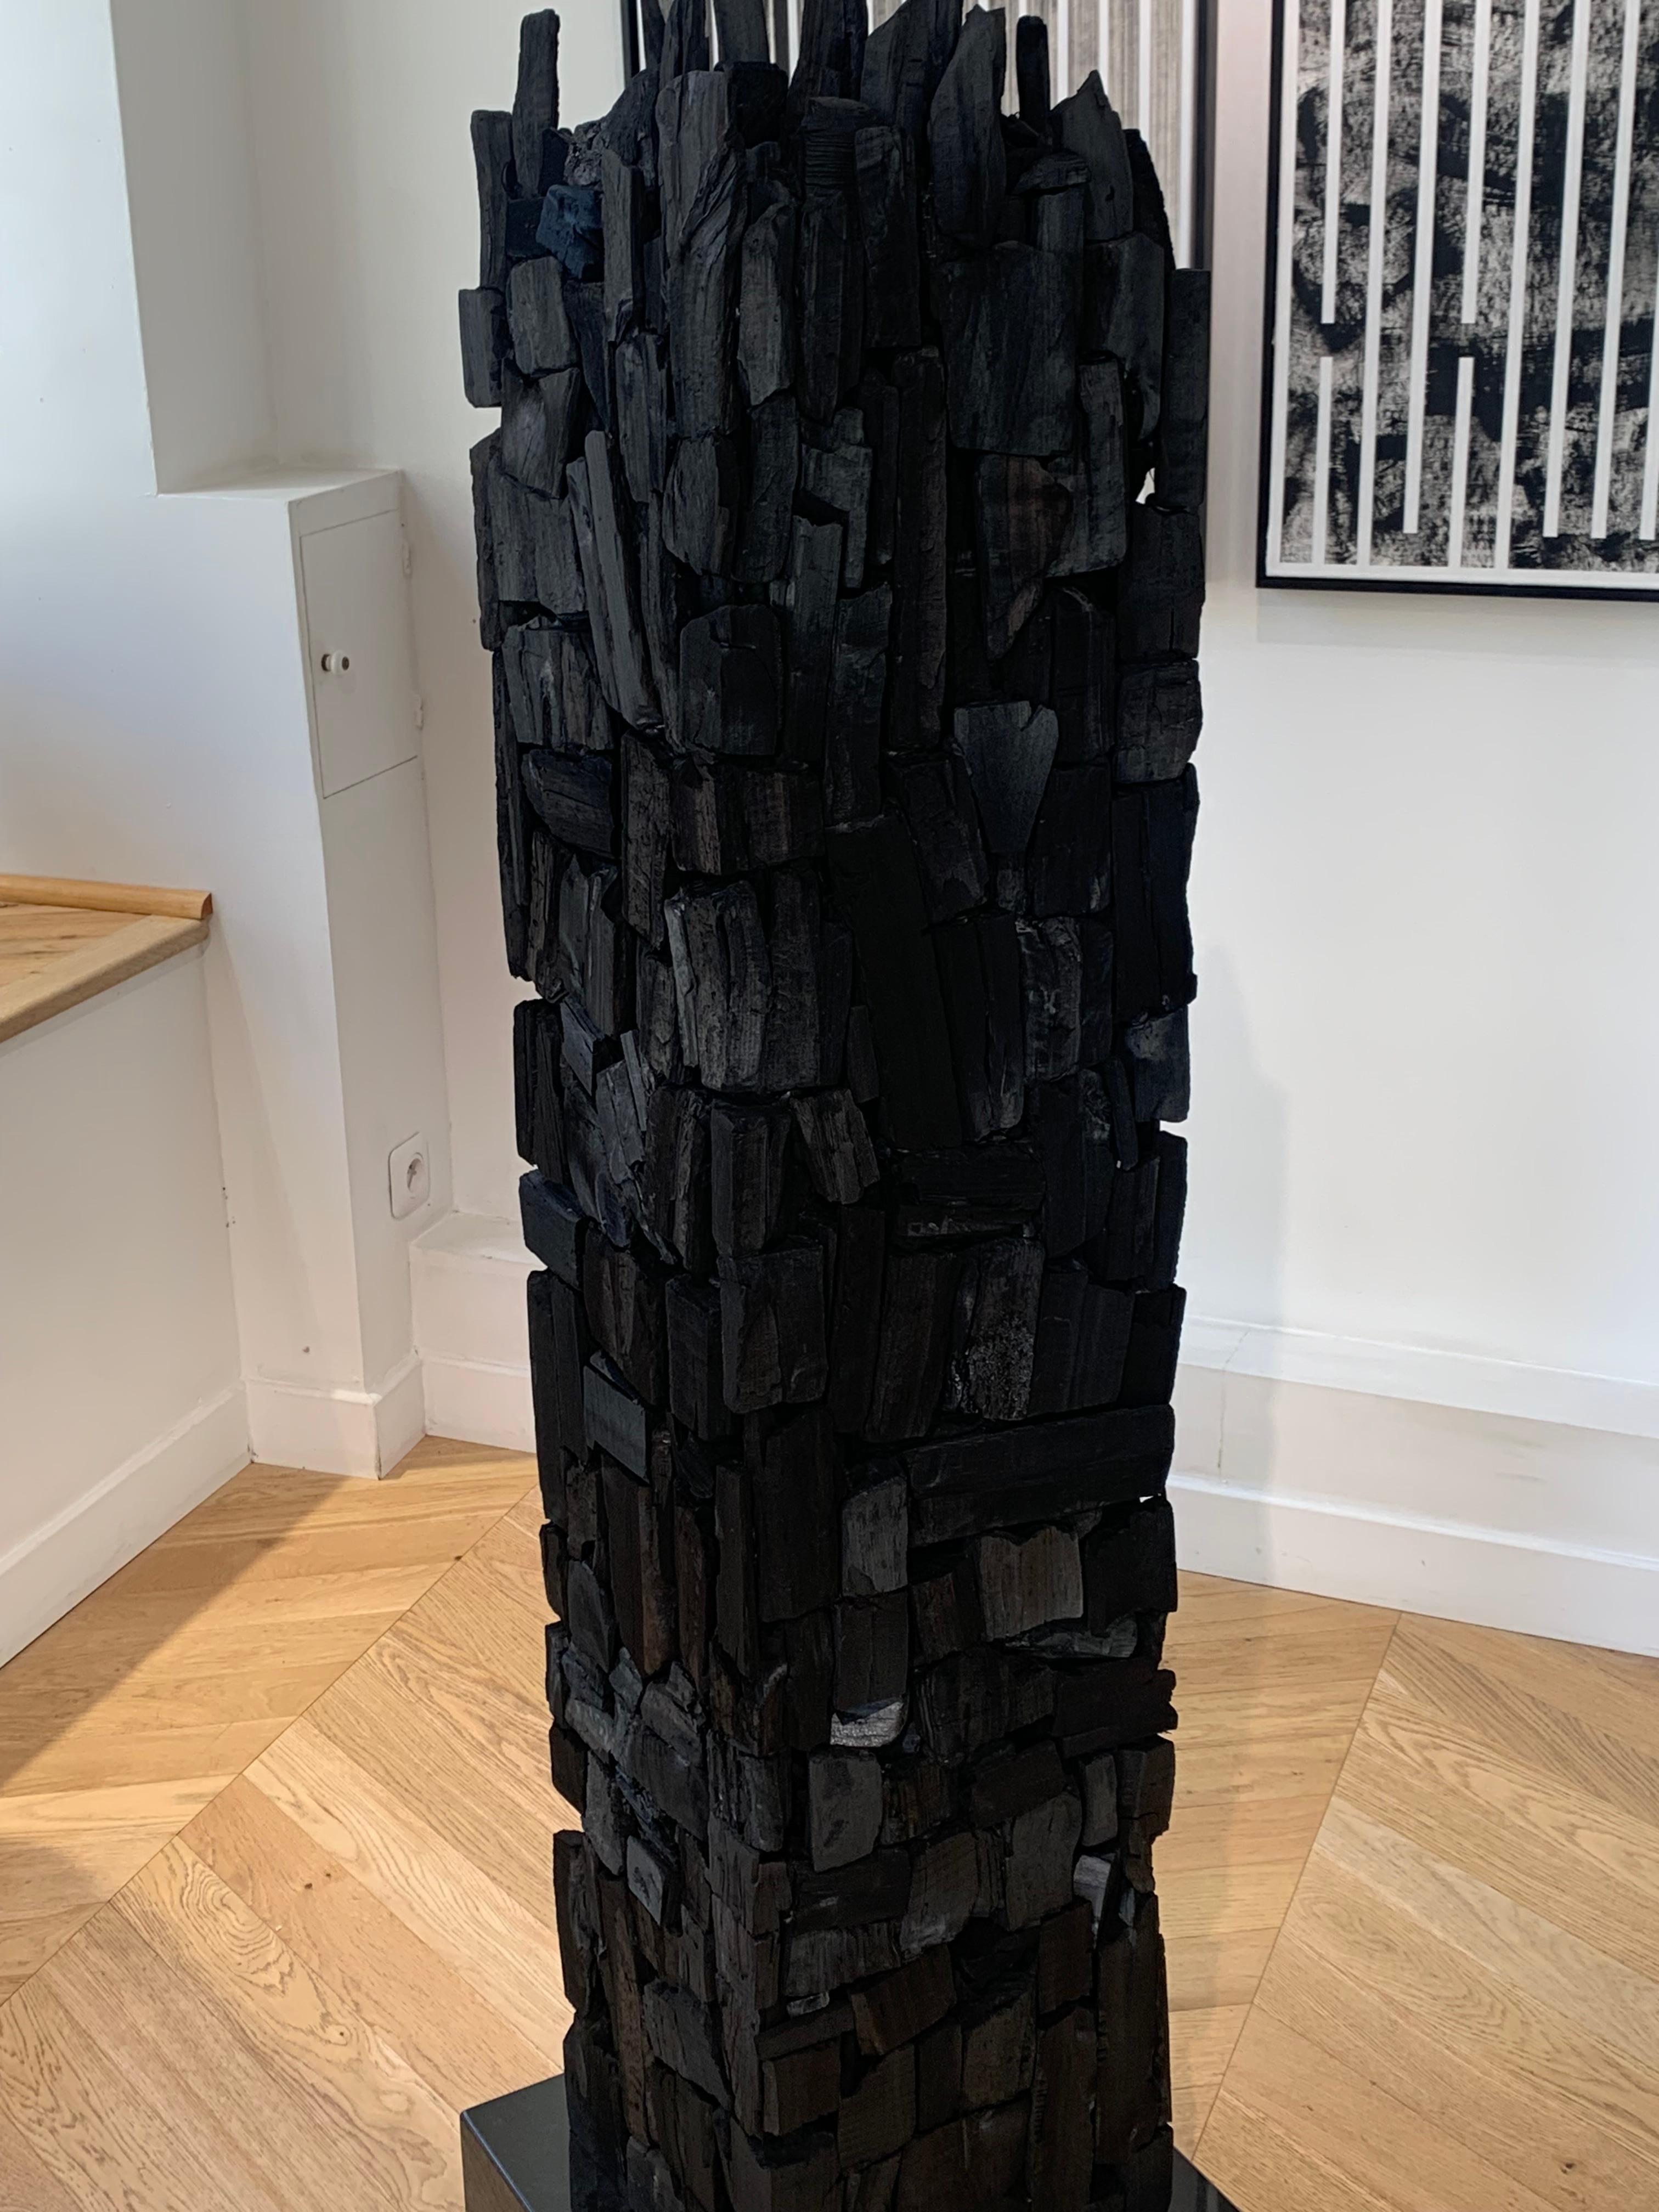 Renaud Bihi
Totem
Charbon et socle en granit  Charcoal and granit base
40 x 40 x 154 cm  15.7 x 15.7 x 60.6 in.
2024

Renaud Bihi, an artist of materials and a man of contrasts, has had a singular career in the art world. Once a well-known florist,